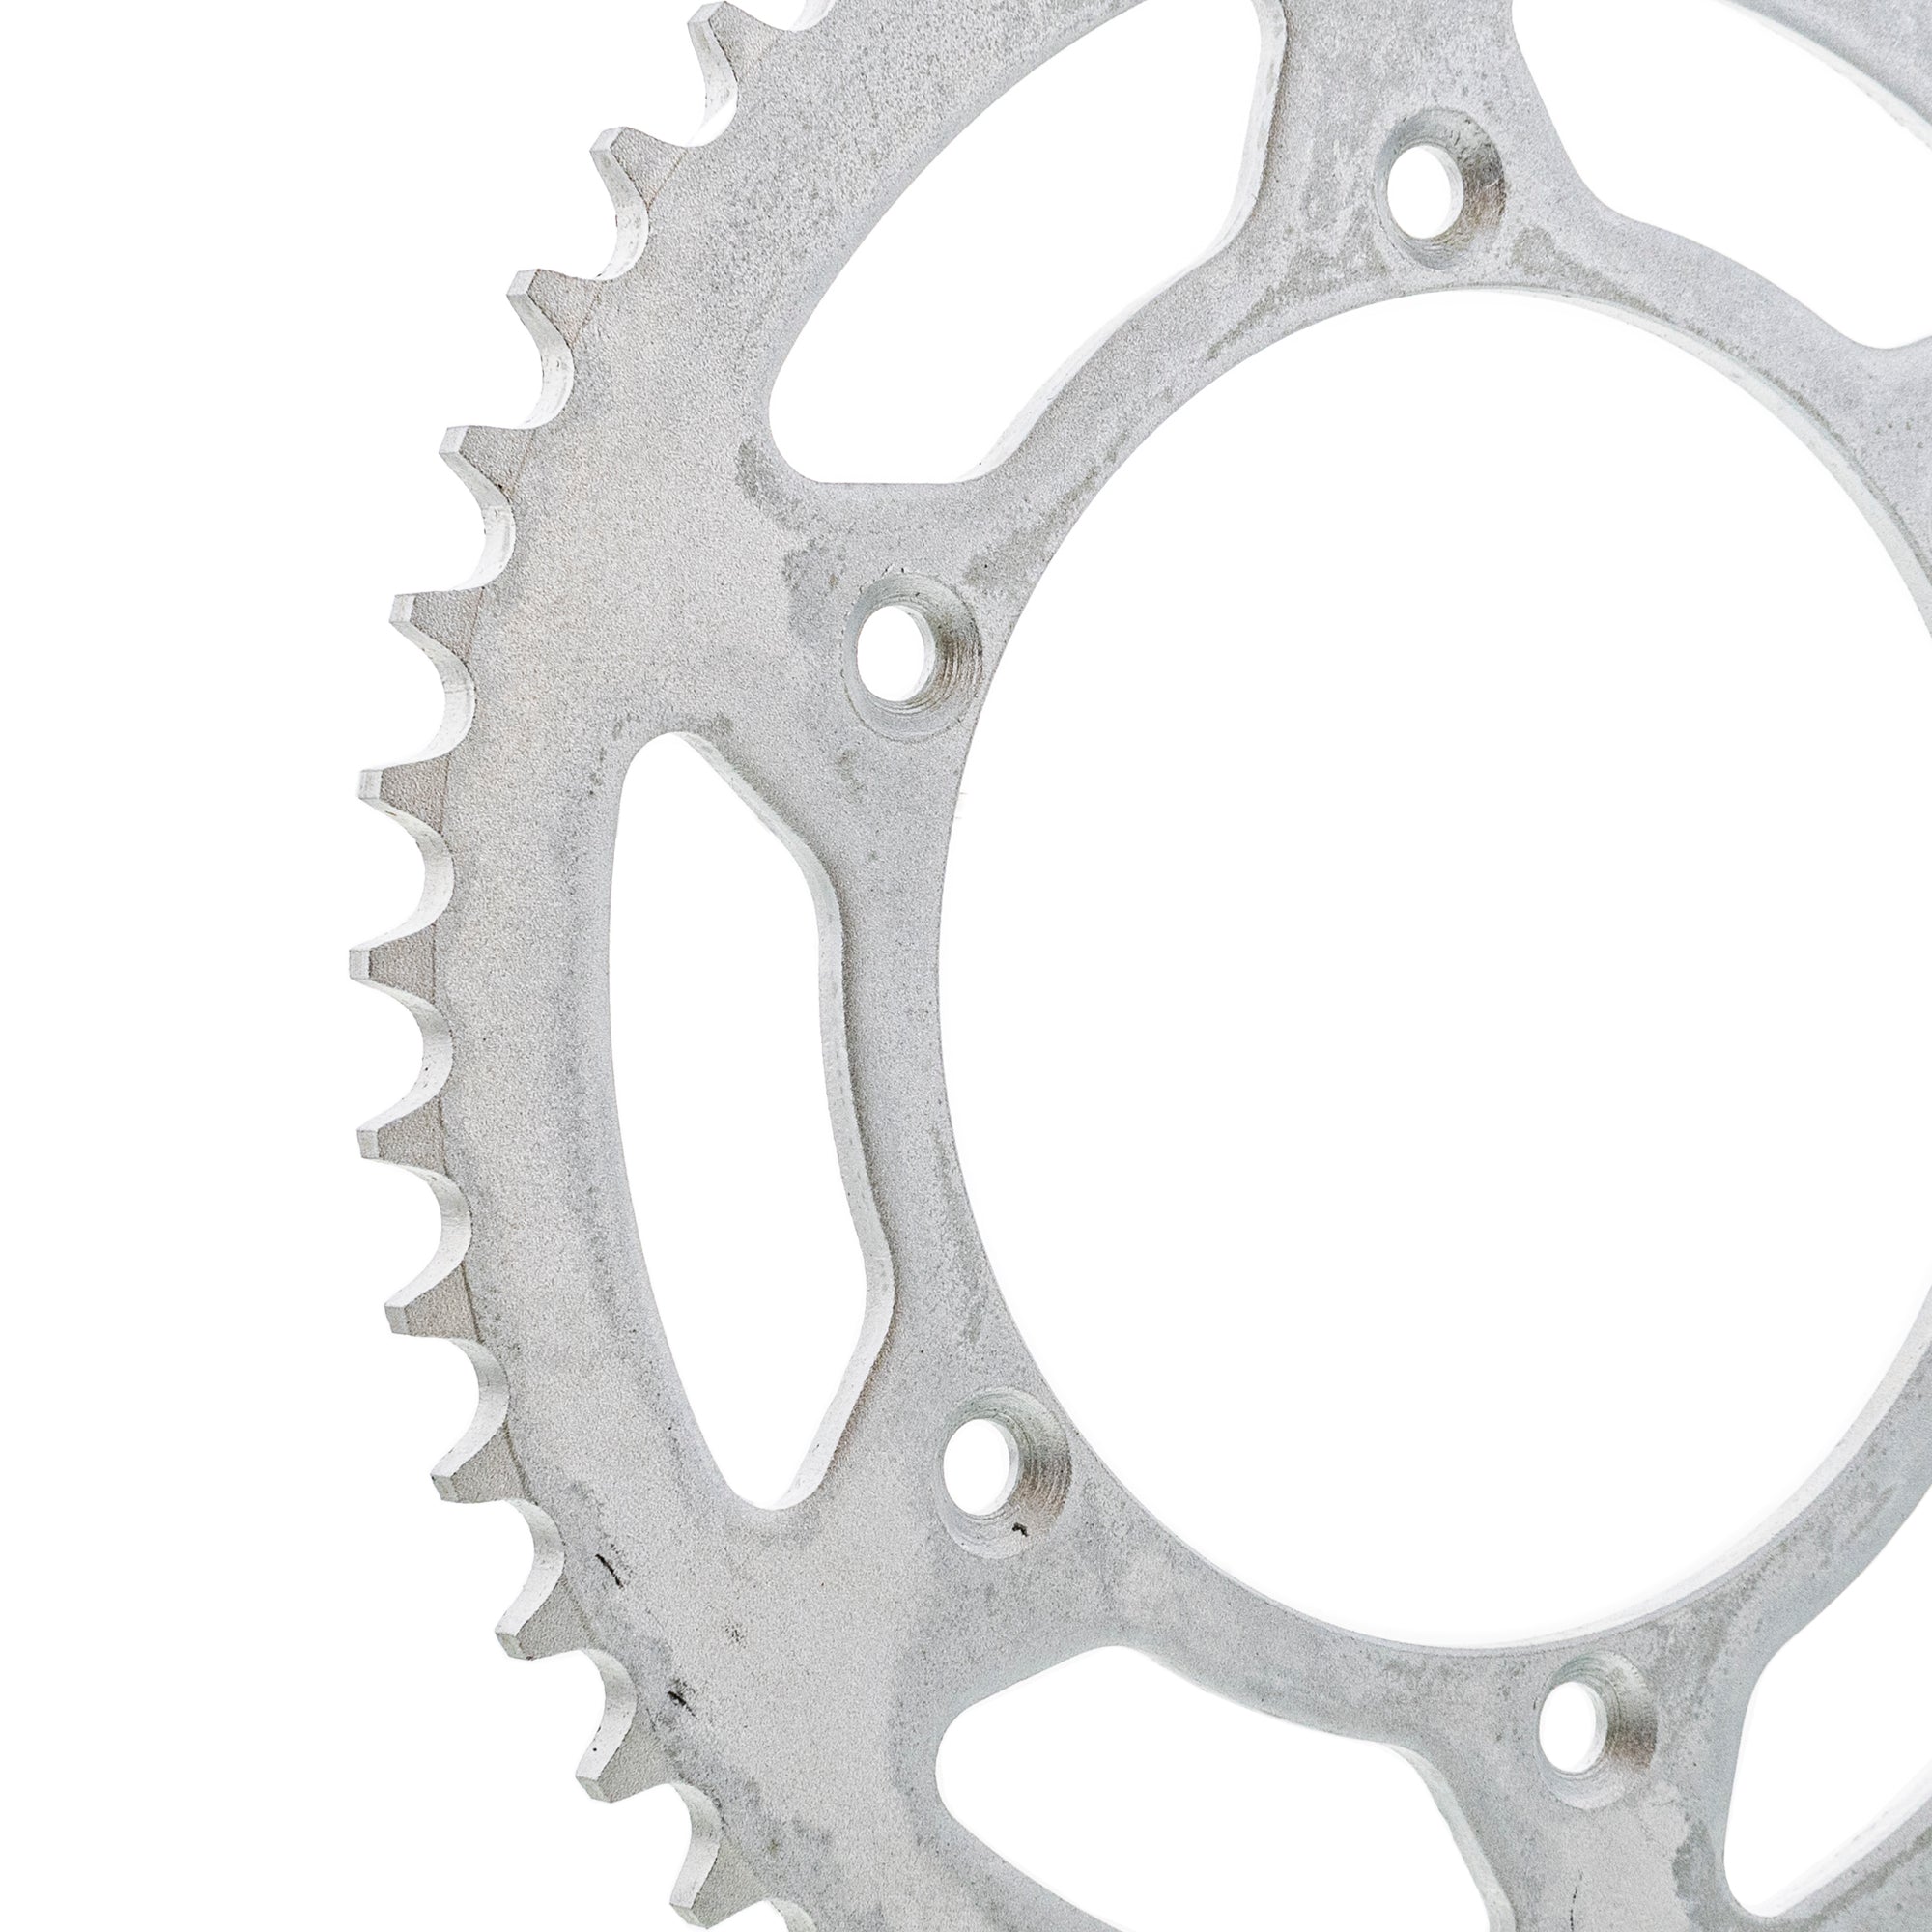 520 Pitch Front 13T Rear 50T Drive Sprocket Kit for Beta RR 350 400